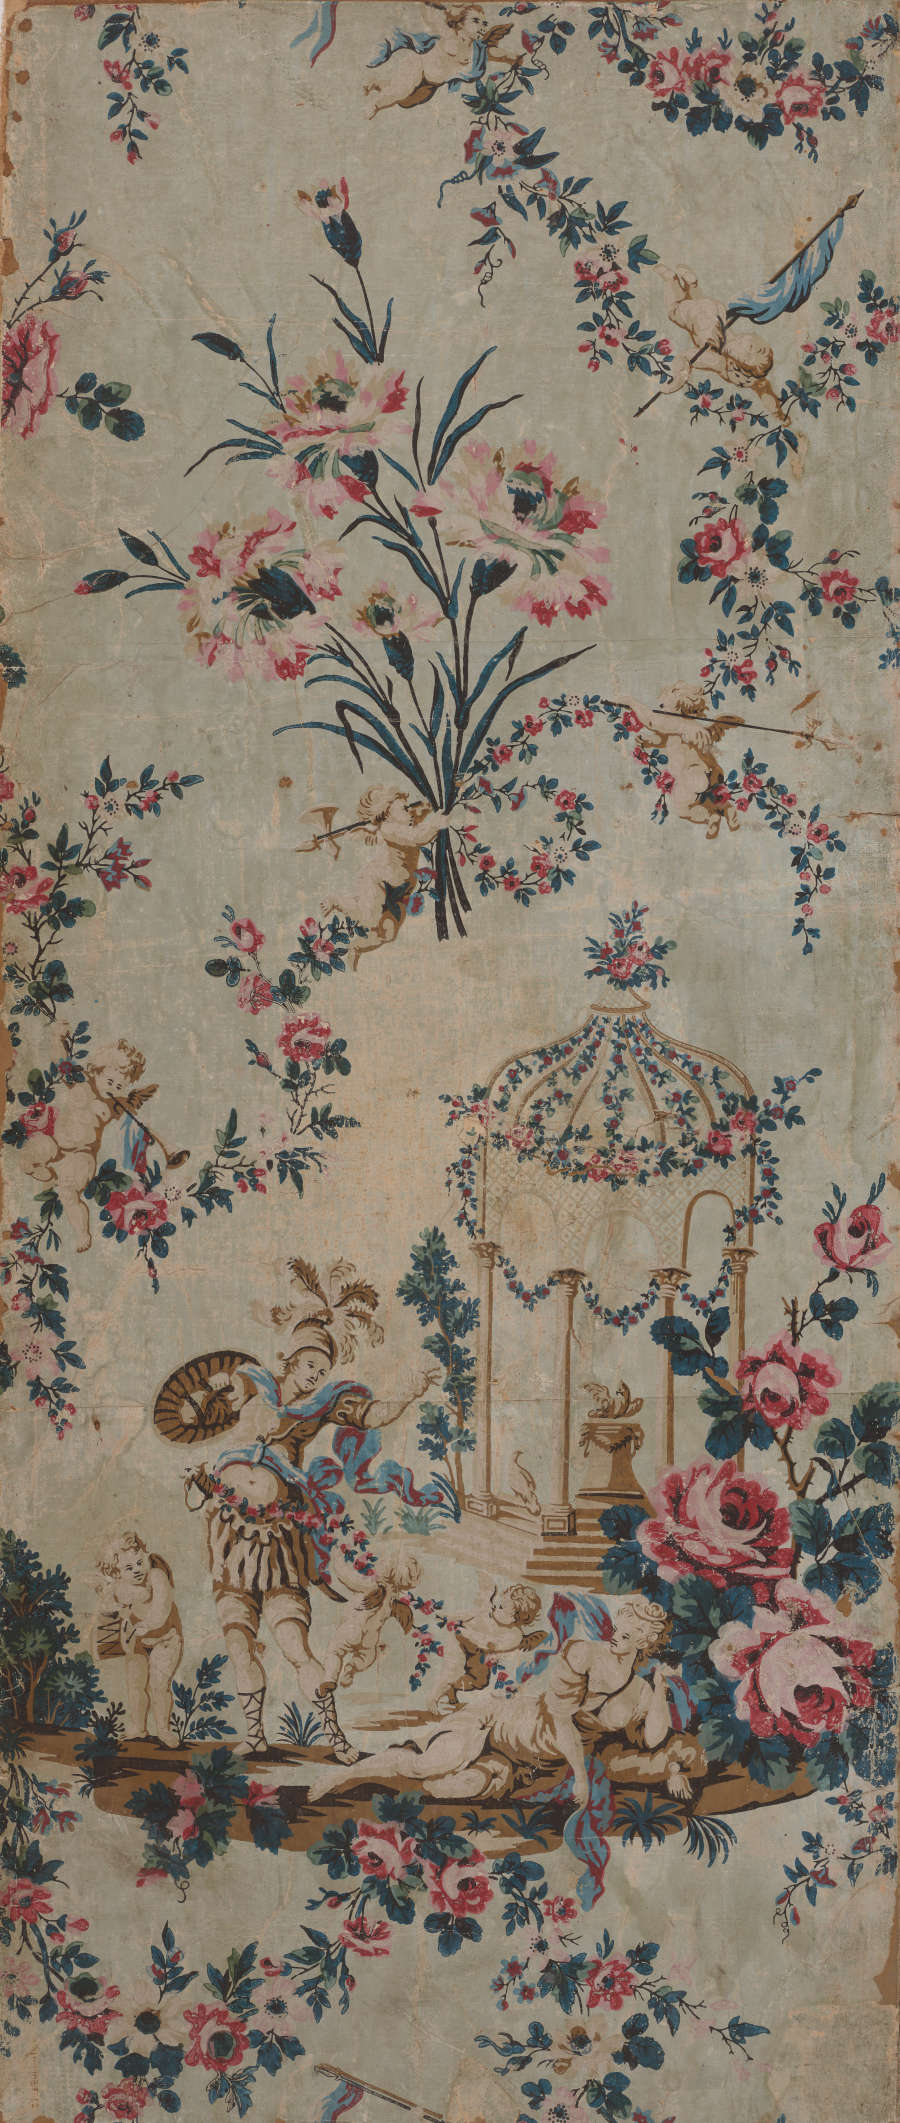 Tall panel of vintage wallpaper featuring a romantic garden scene. The intricate, pastel toned, design depicts playful cherubs, draping garlands of roses, and a gazebo in the background.